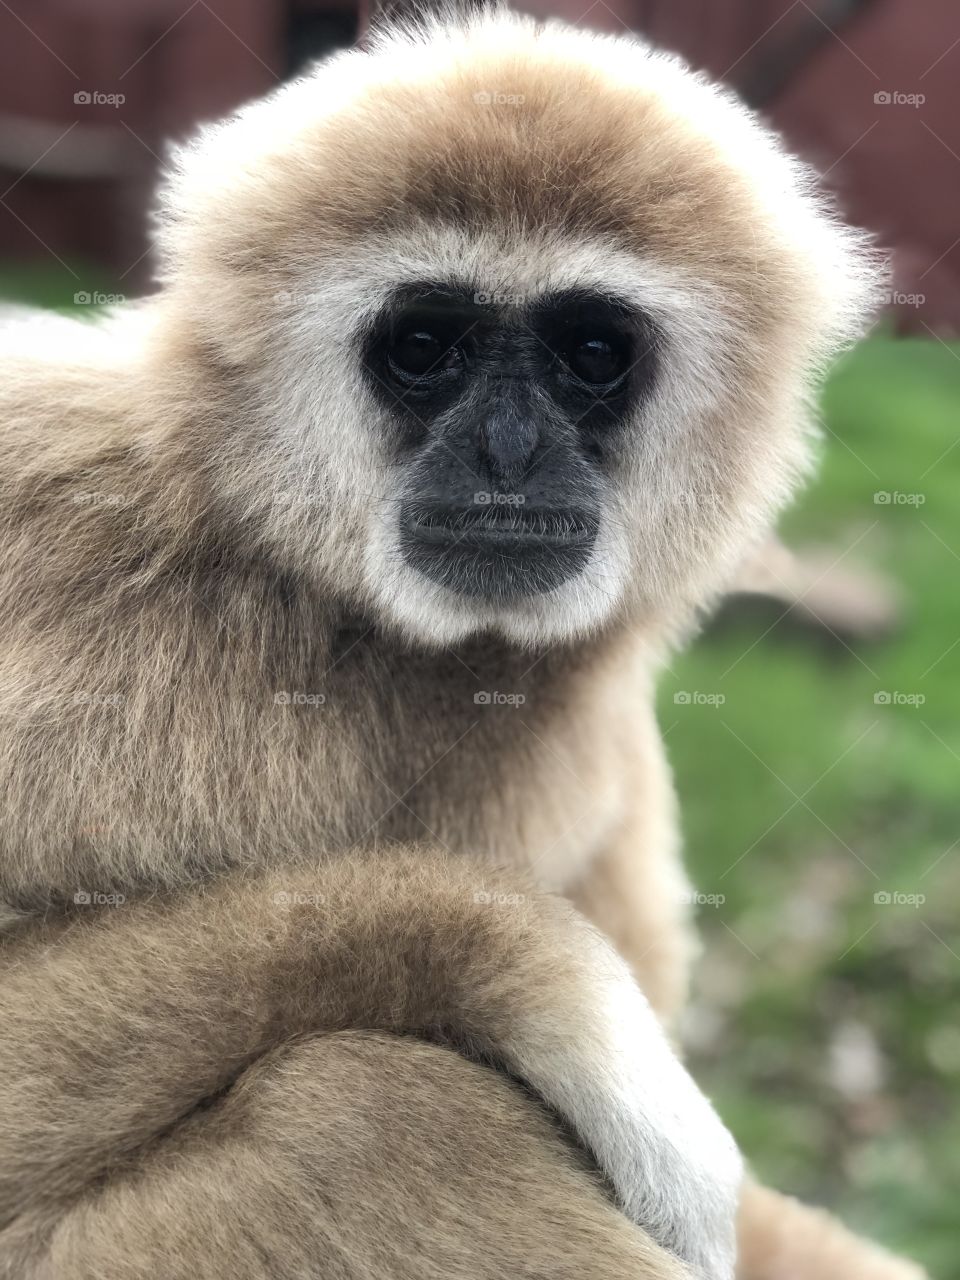 Gibbons are not monkeys. They are apes. 